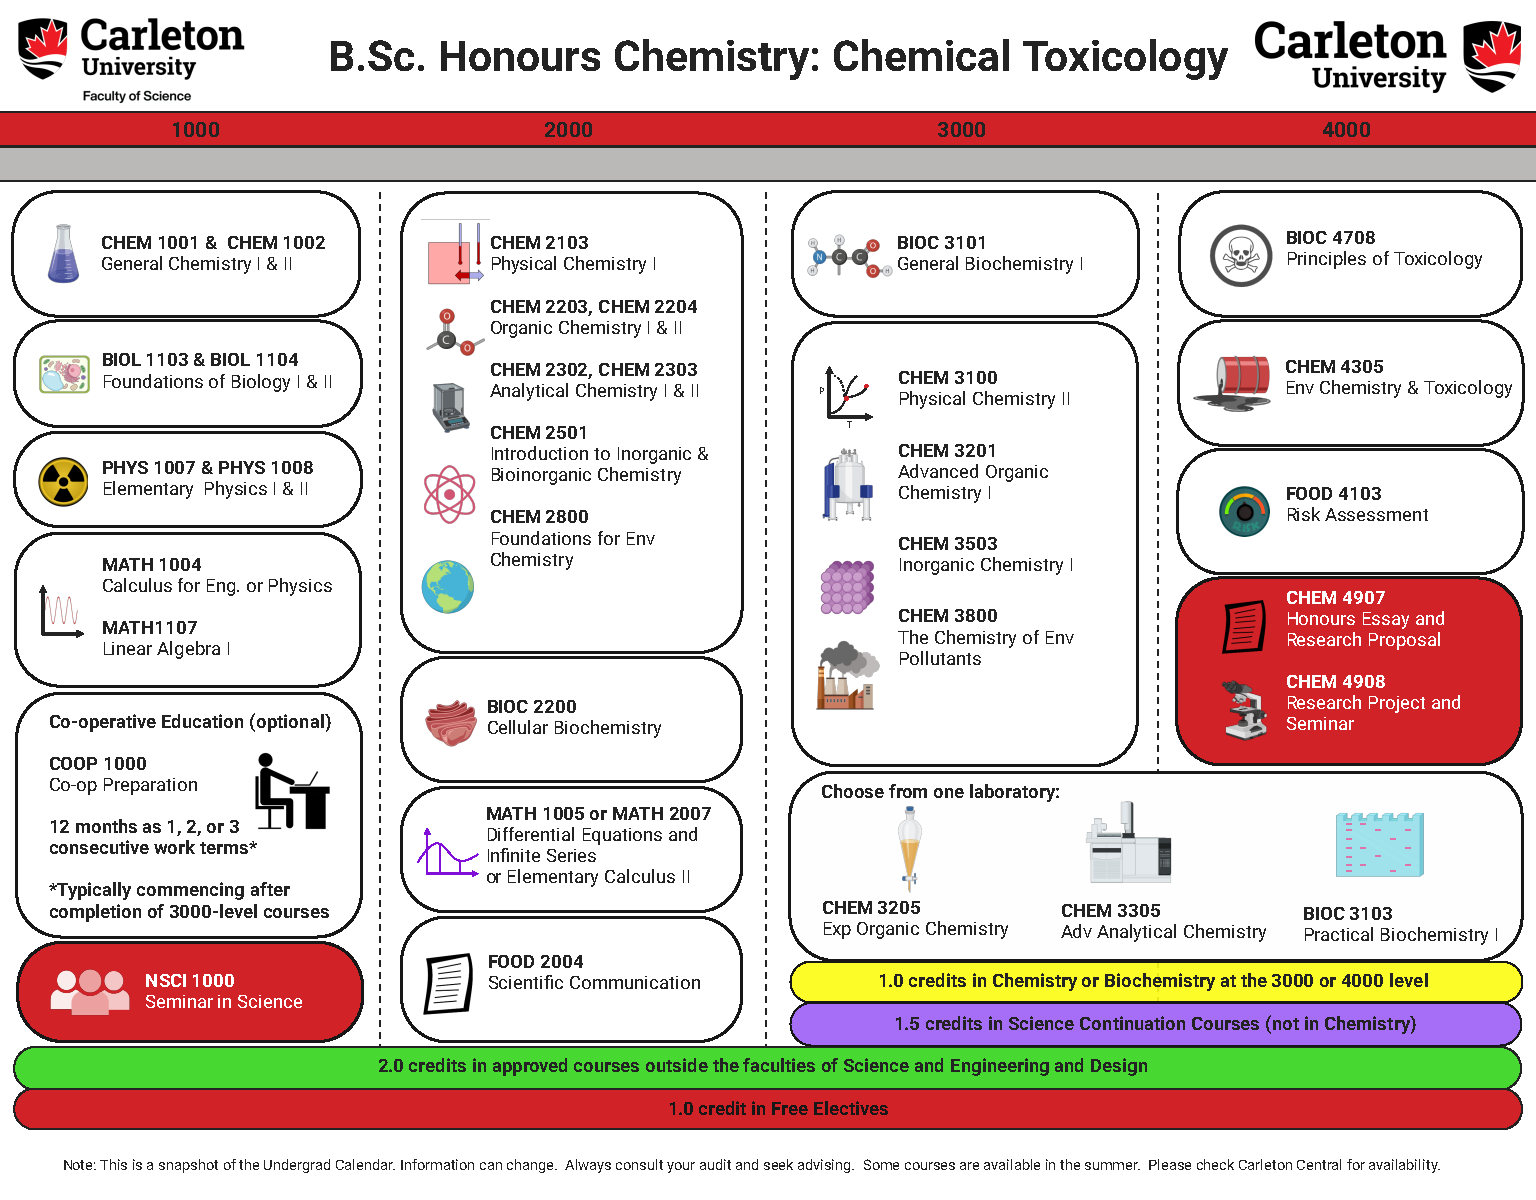 Course map for B.Sc. Honours Chemistry: Chemical Toxicology.